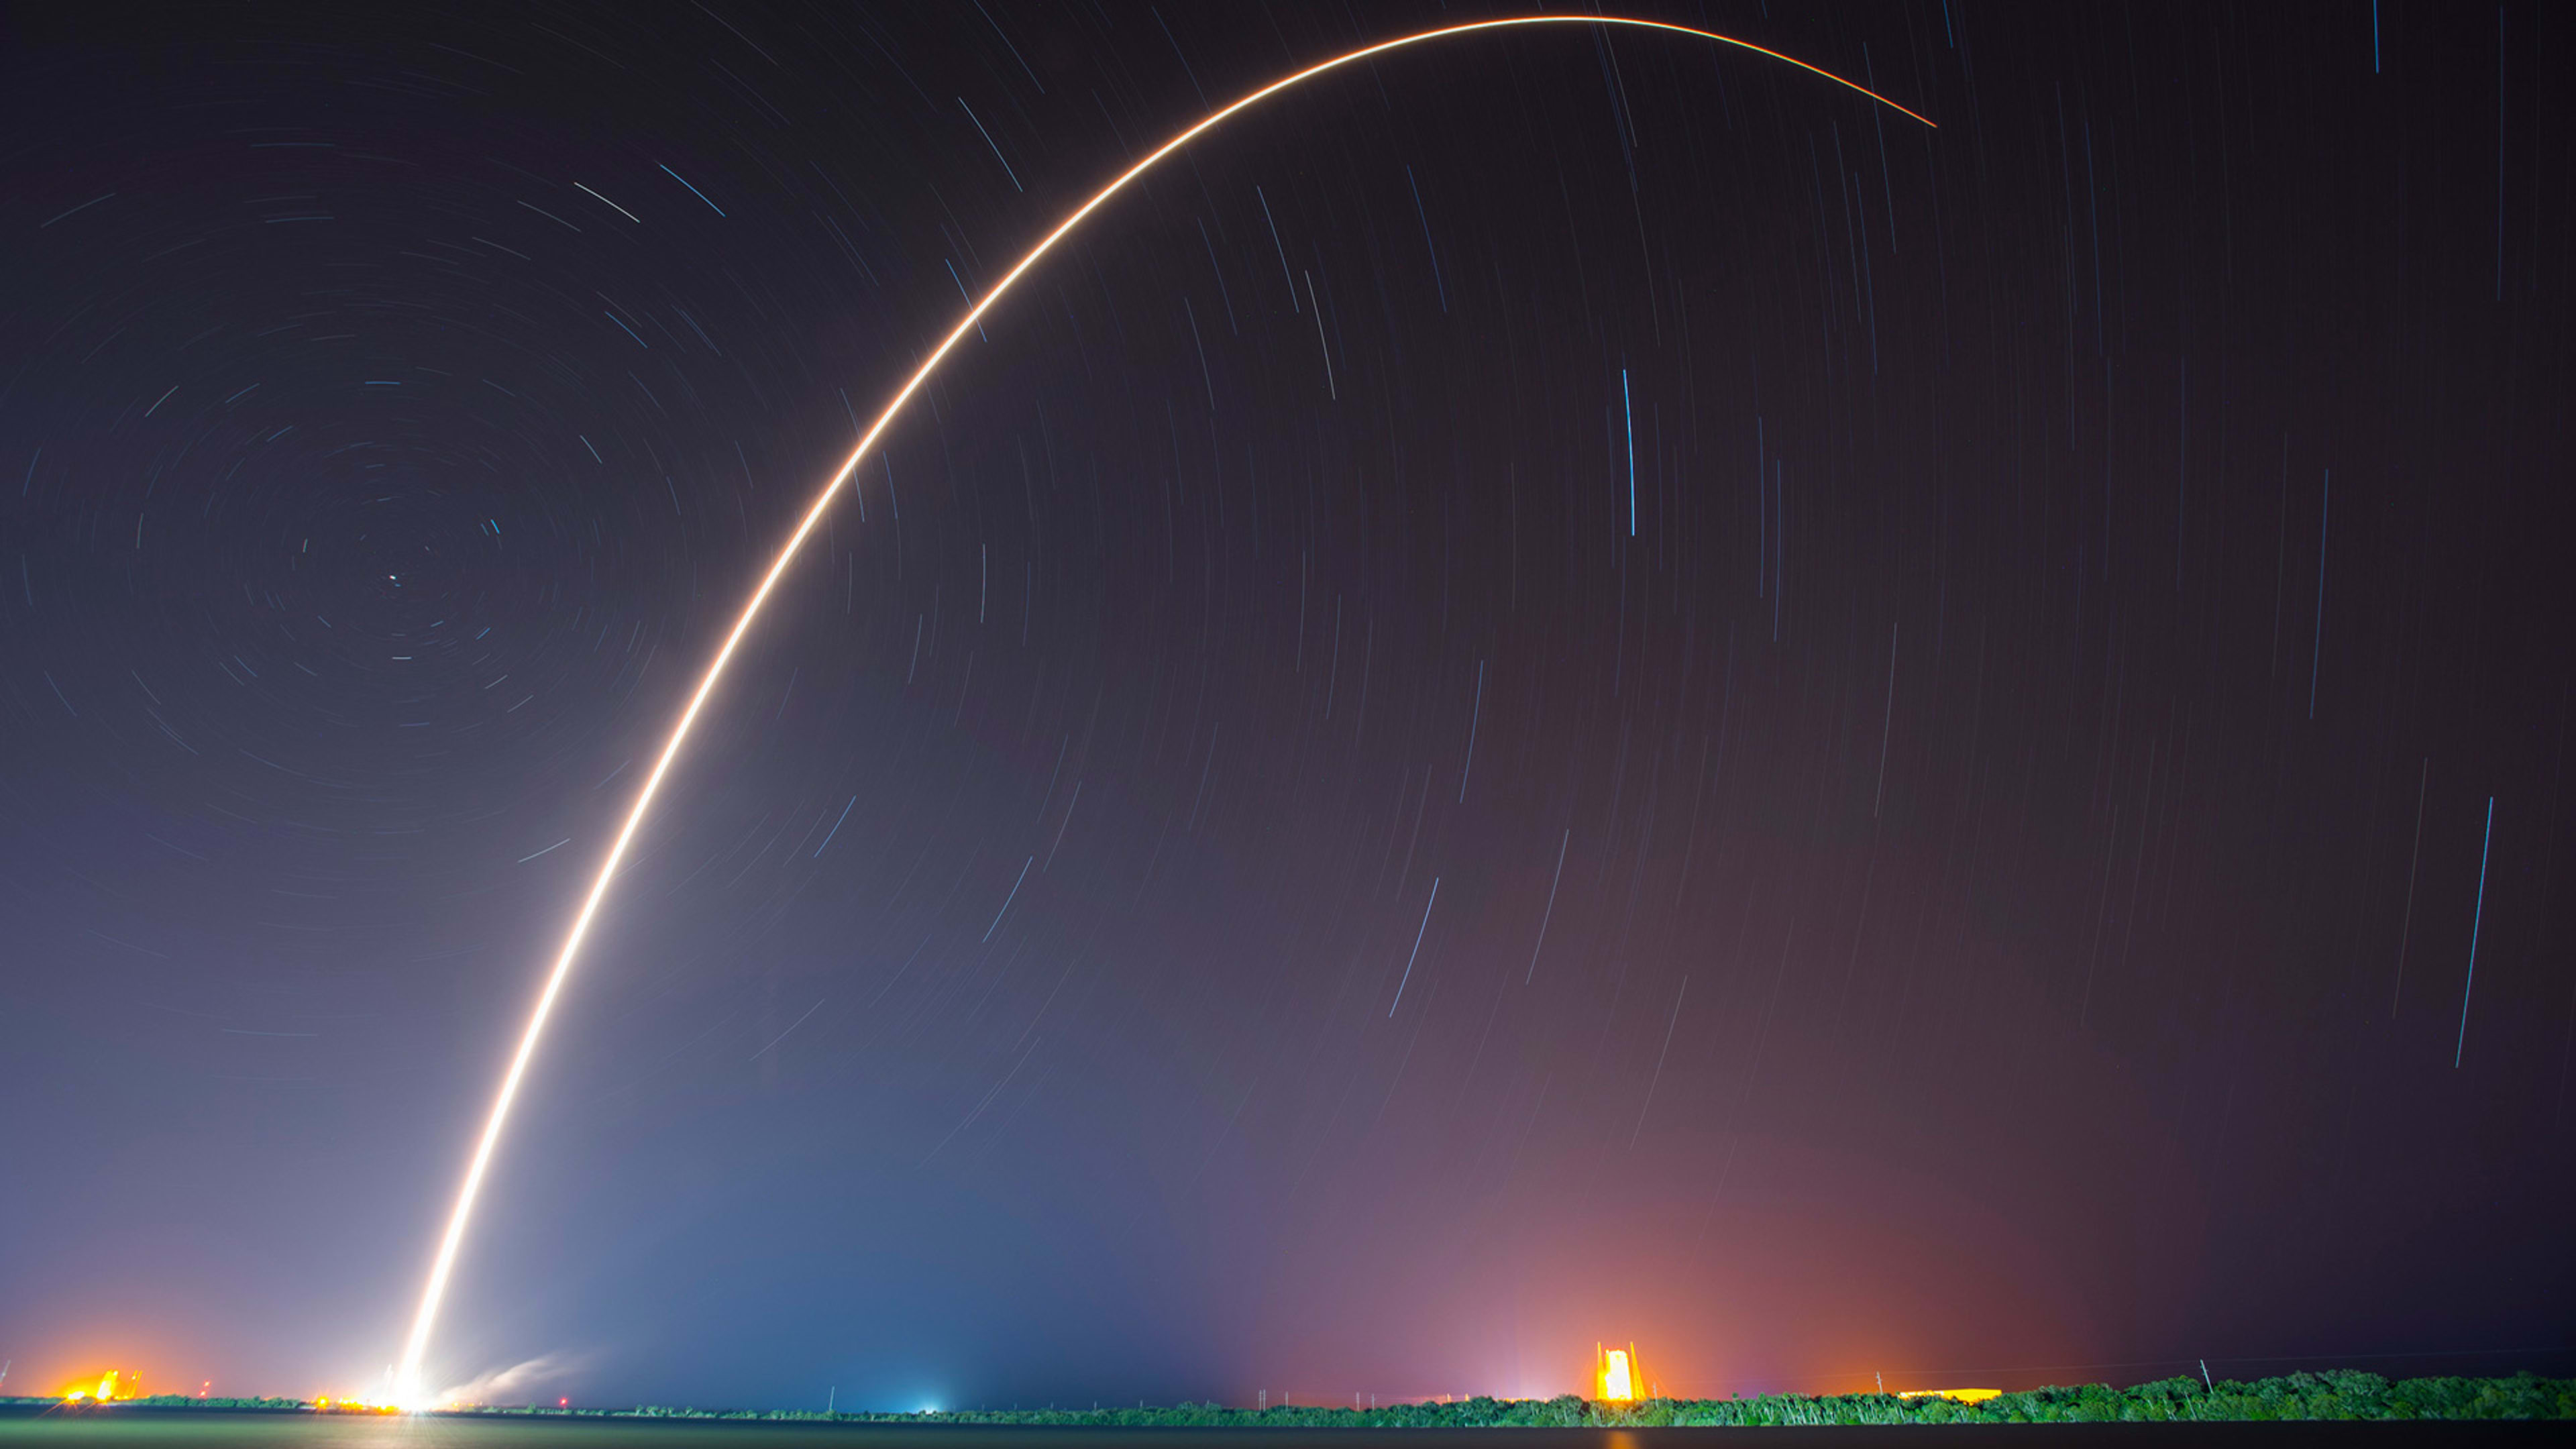 SpaceX wants to replace long-haul flights with rocket travel in the next 10 years